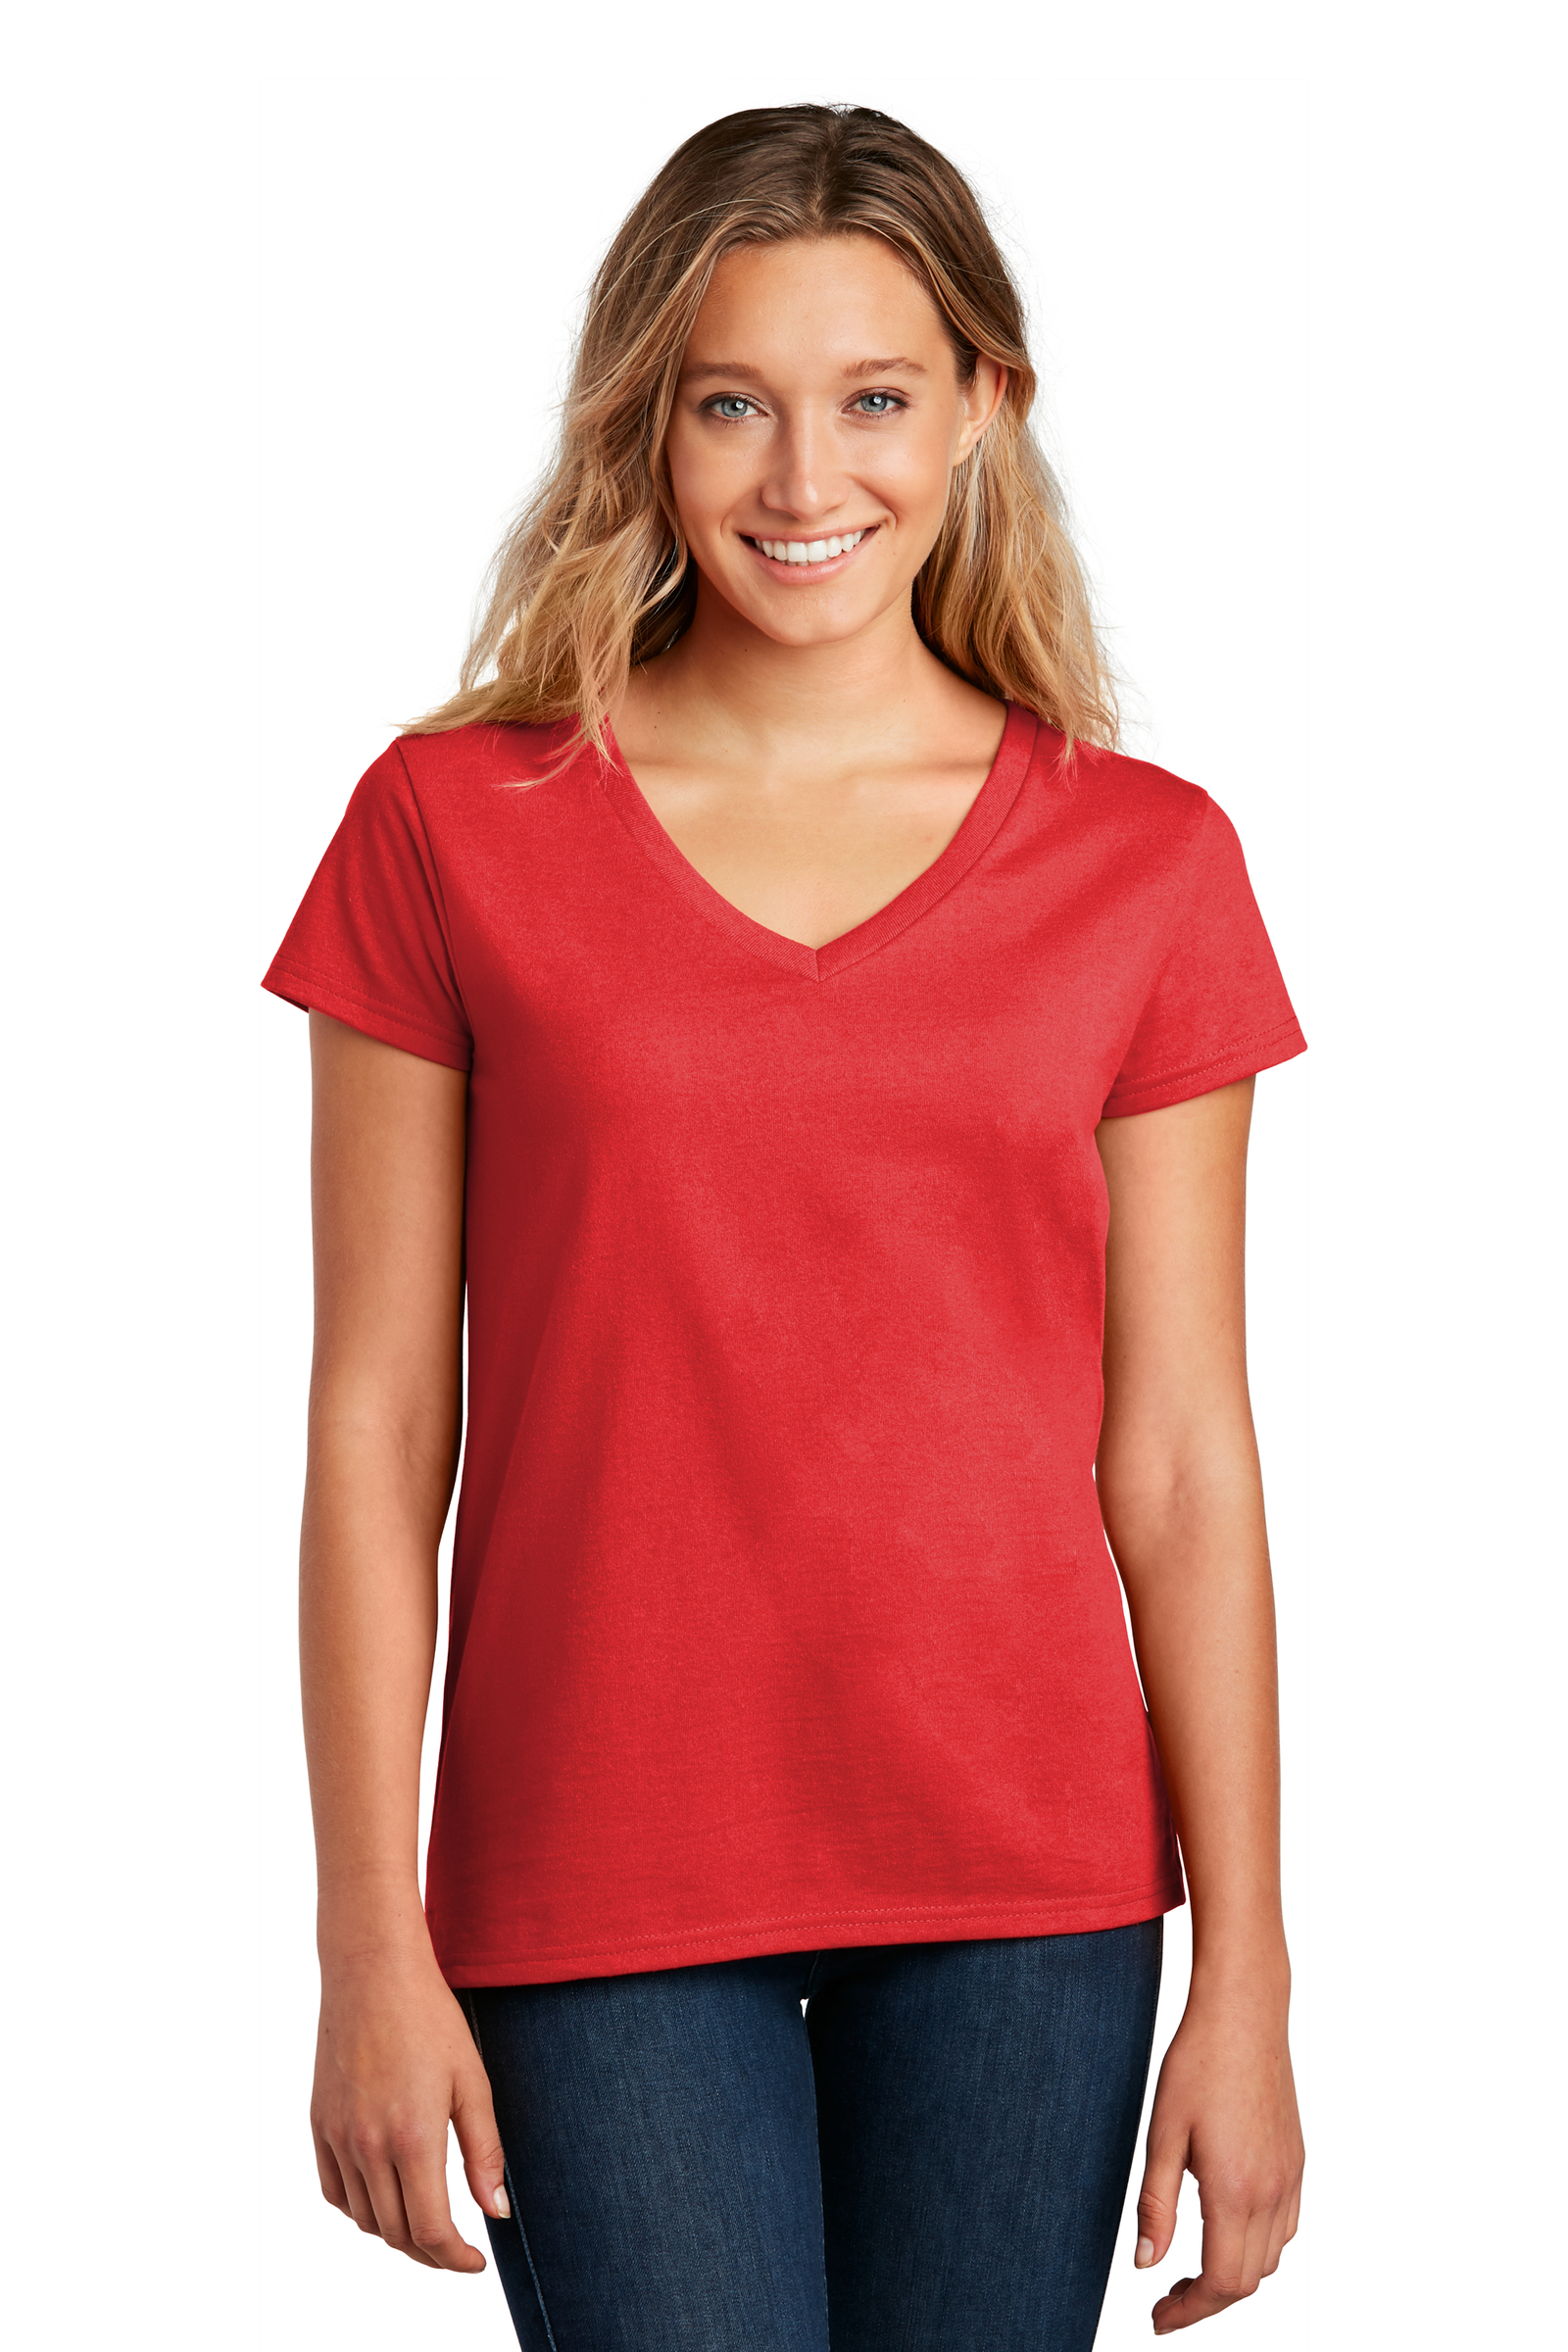 District Embroidered Women's Re-Tee V-Neck